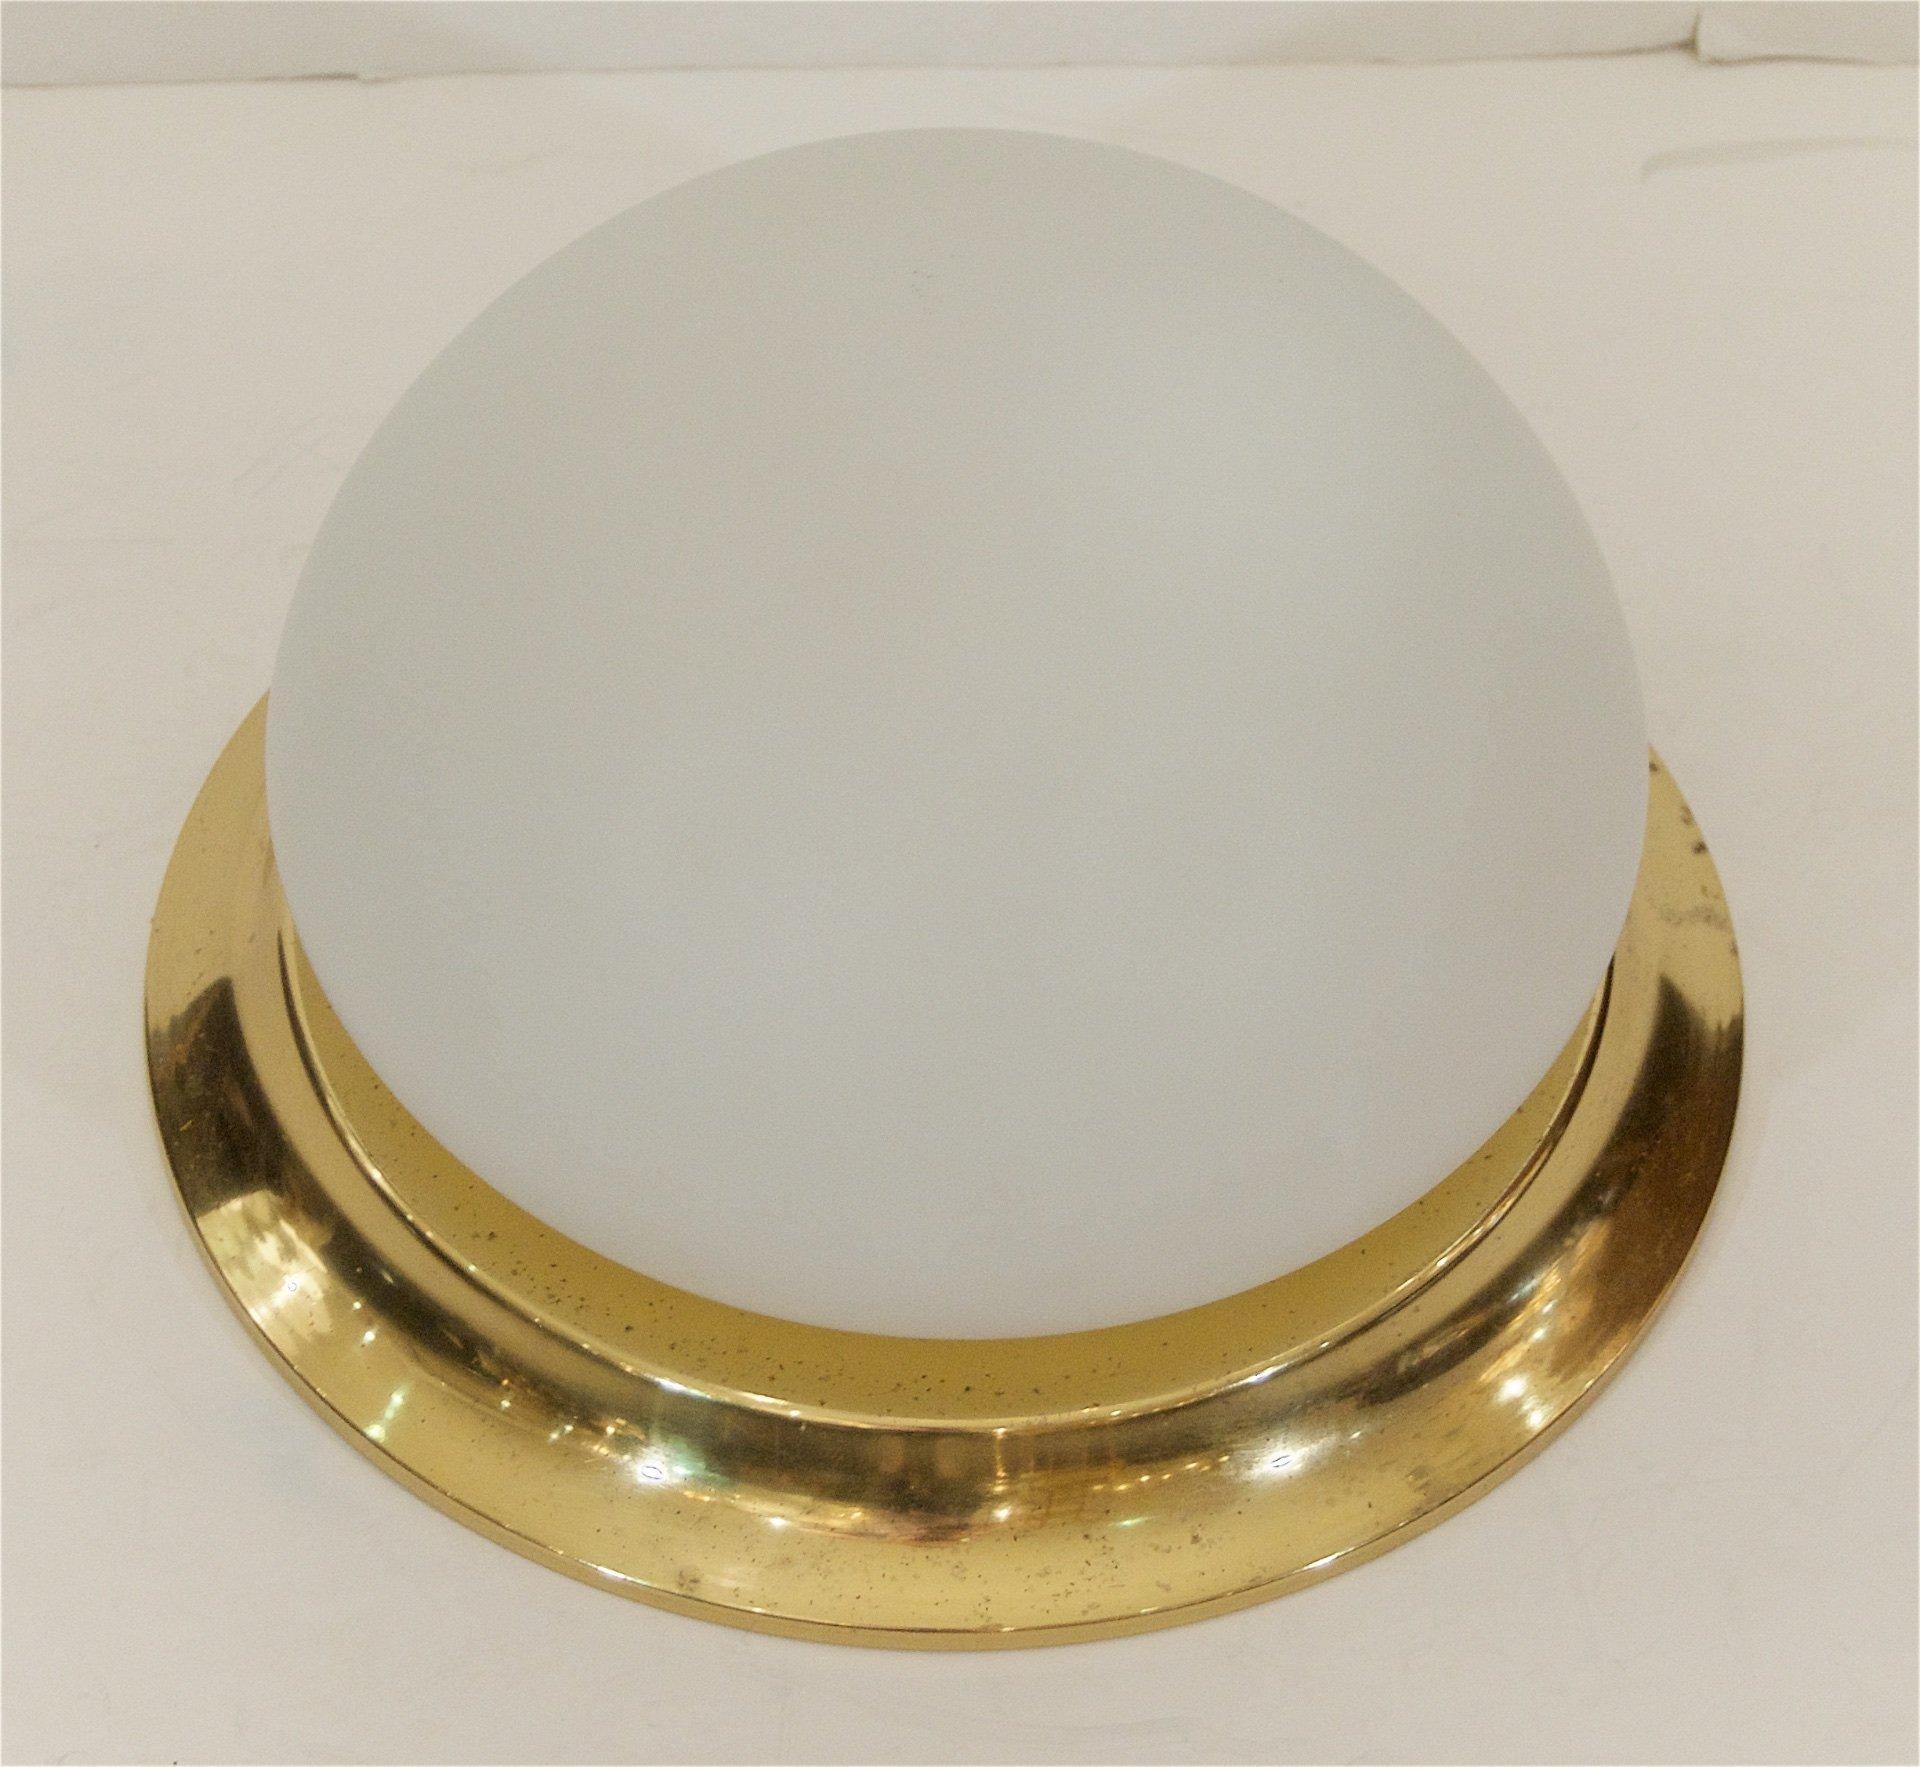 RZB Leuchten
Germany, 1960s

Well sized domed opal glass flush mount with a brass surround.

Takes one medium base bulbs up to 60 watts per bulb. New wiring.

Materials: Brass, opal glass
Excellent condition: Minor wear consistent with age and